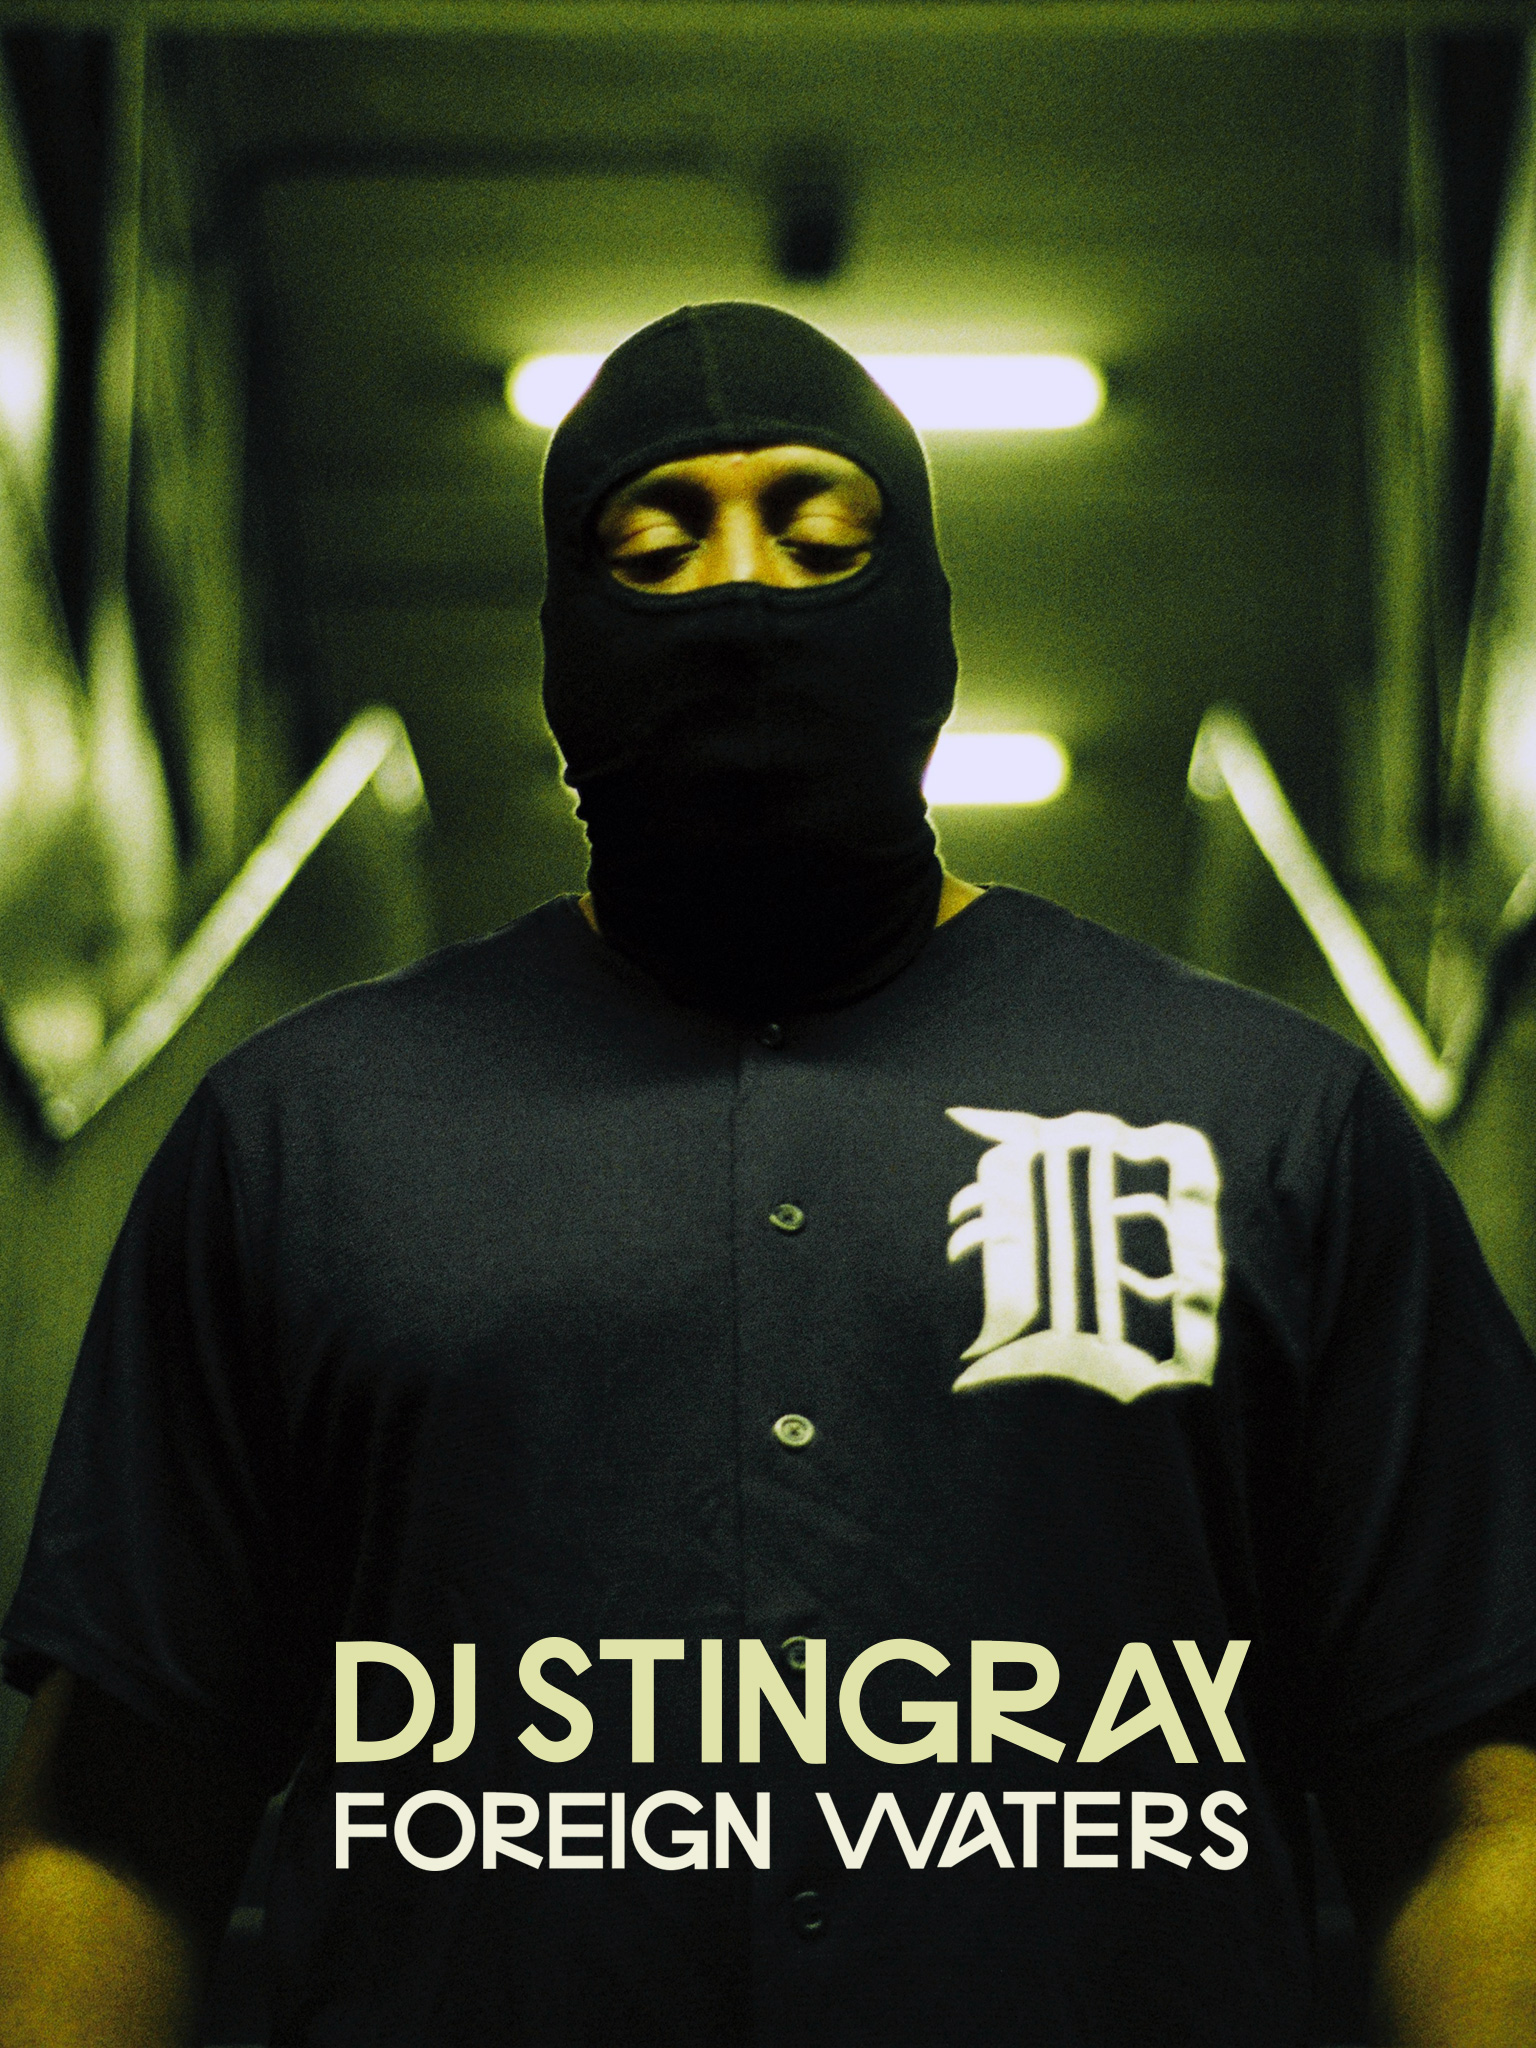 DJ Stingray: Foreign waters